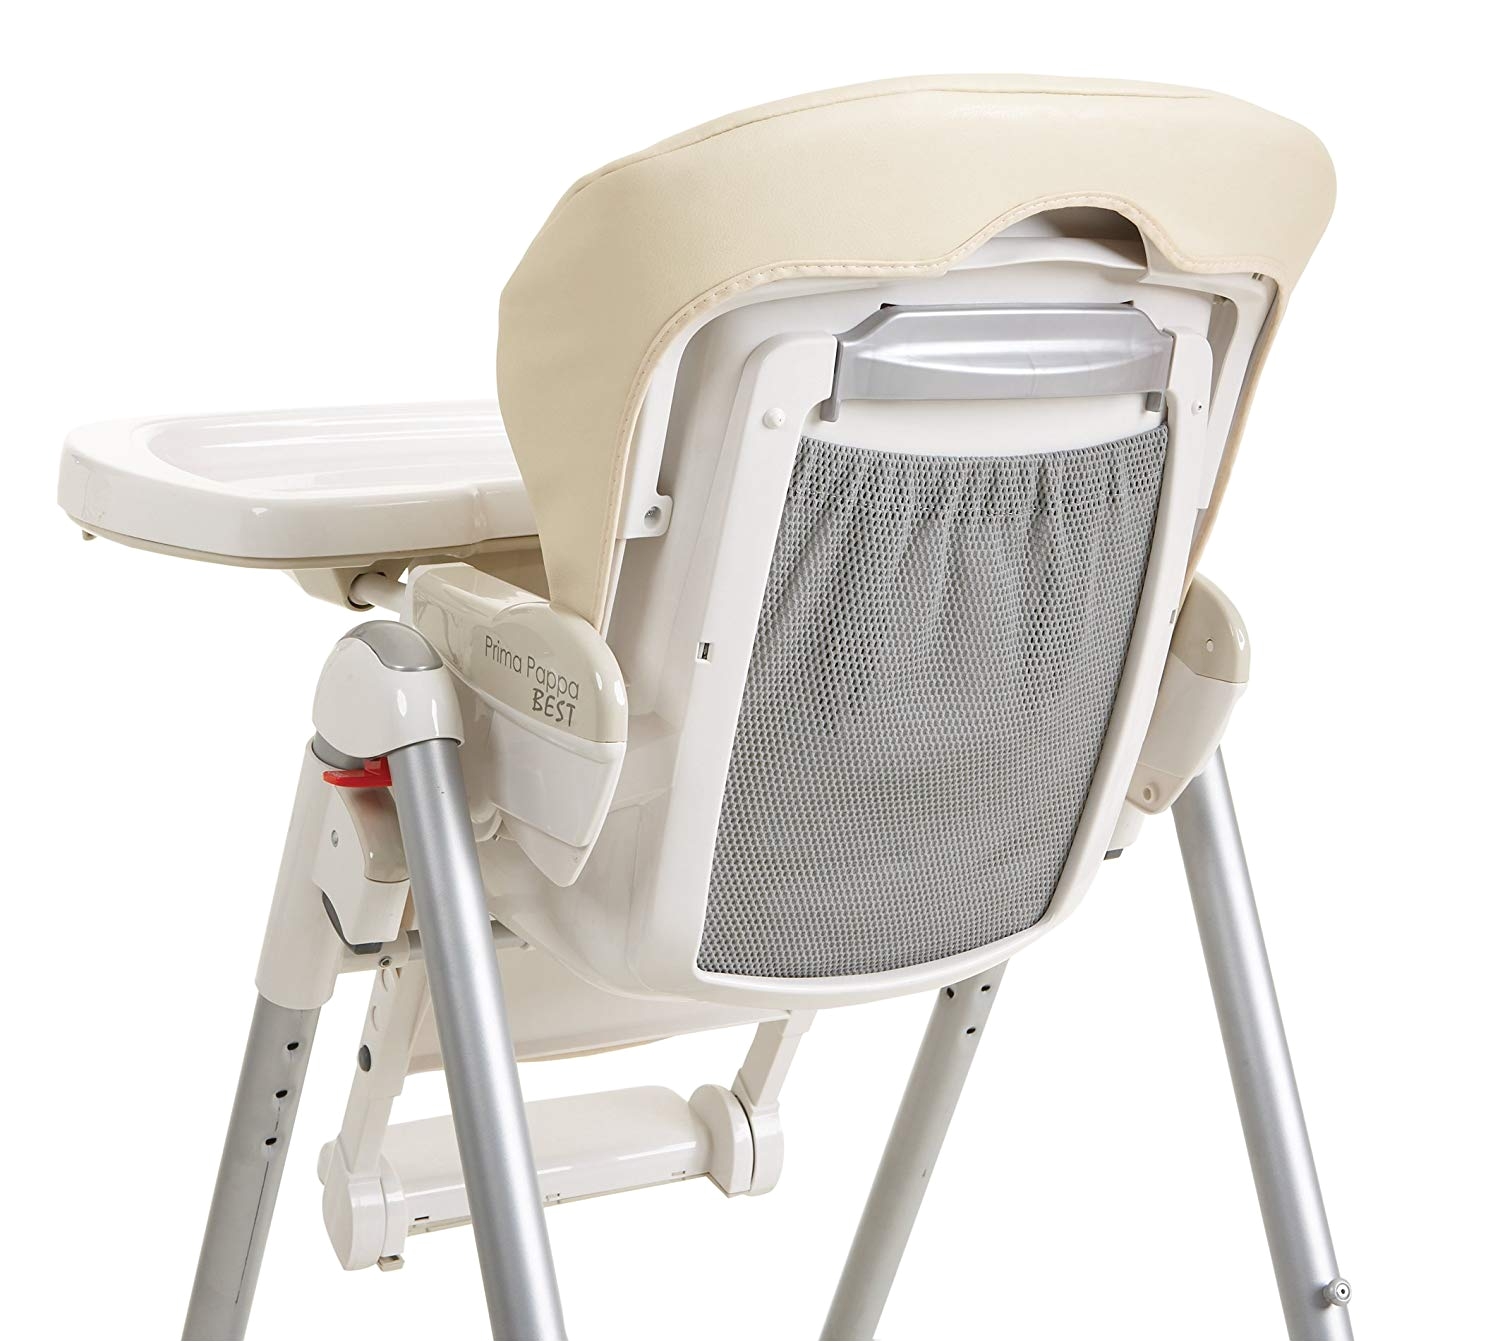 Top Rated High Chairs Canada Peg Perego Prima Pappa Best High Chair Paloma Amazon Co Uk Baby